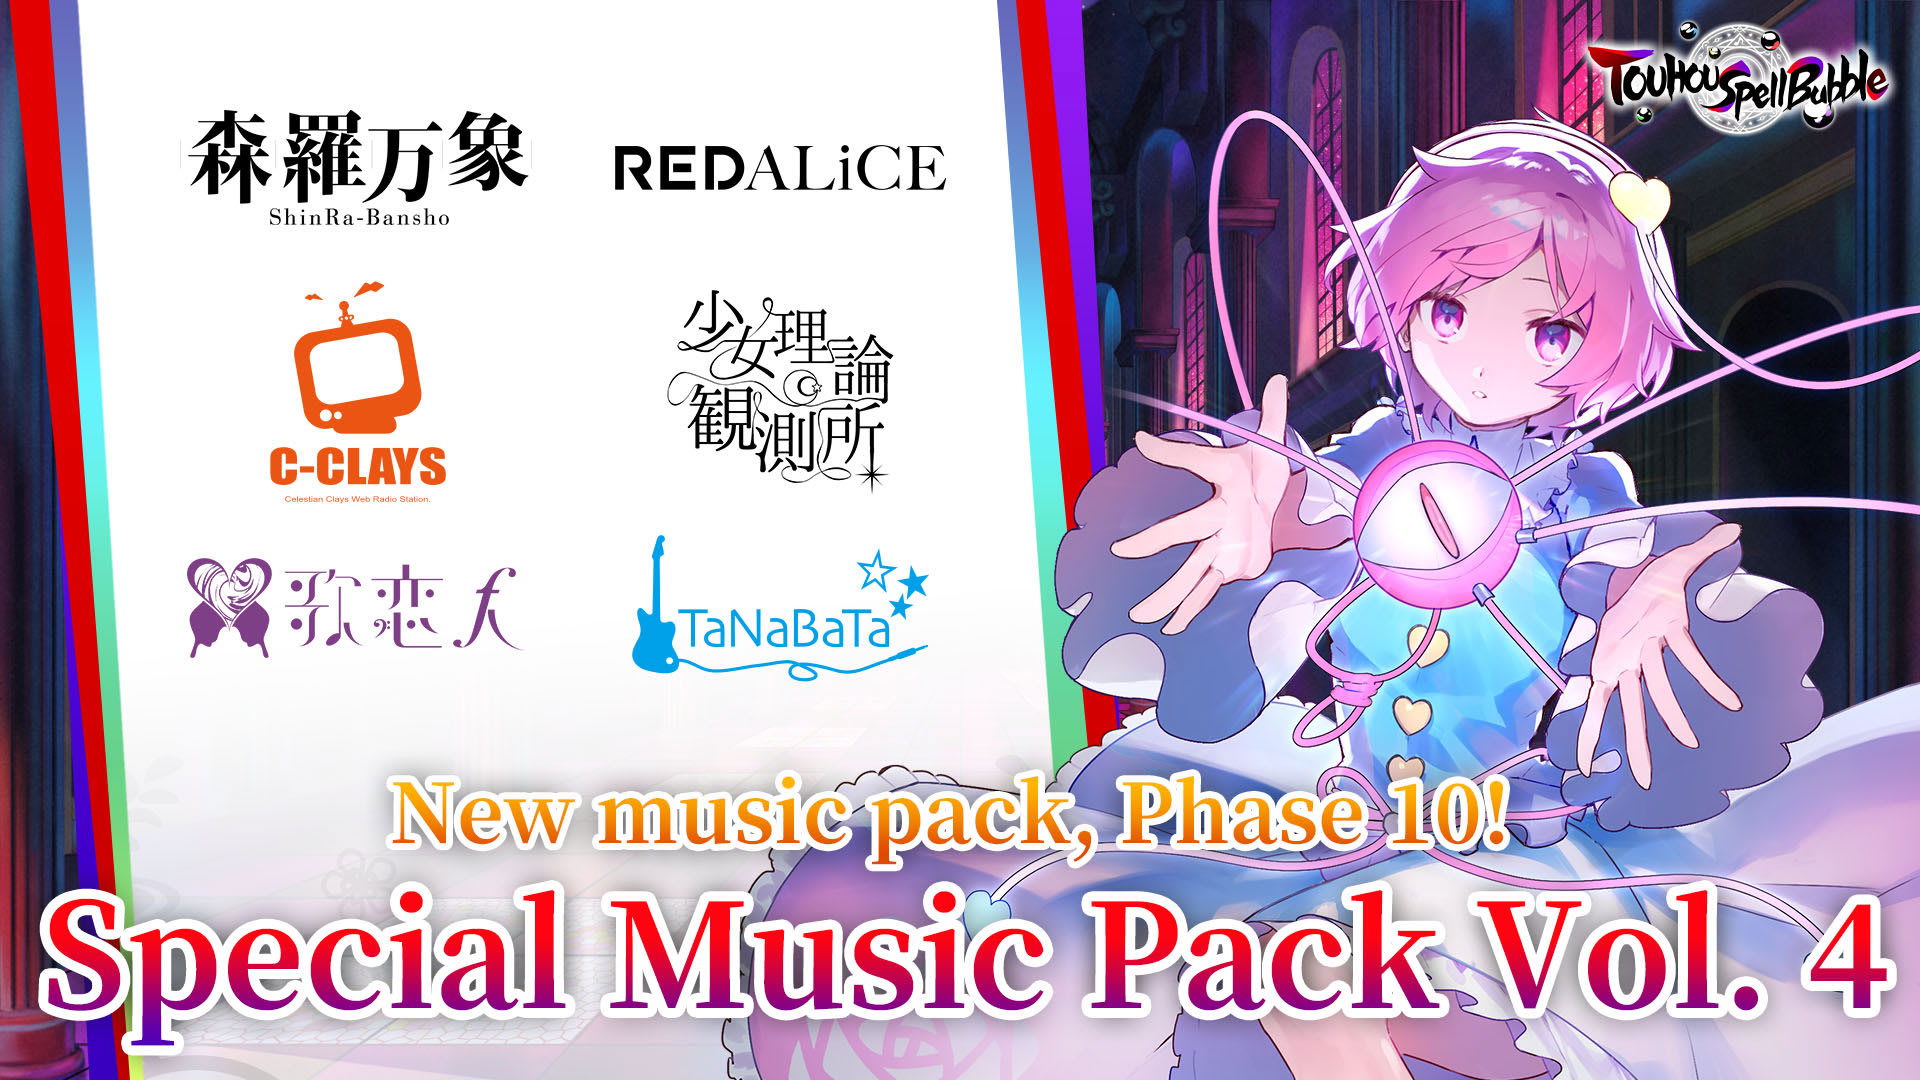 Special Music Pack Vol. 4